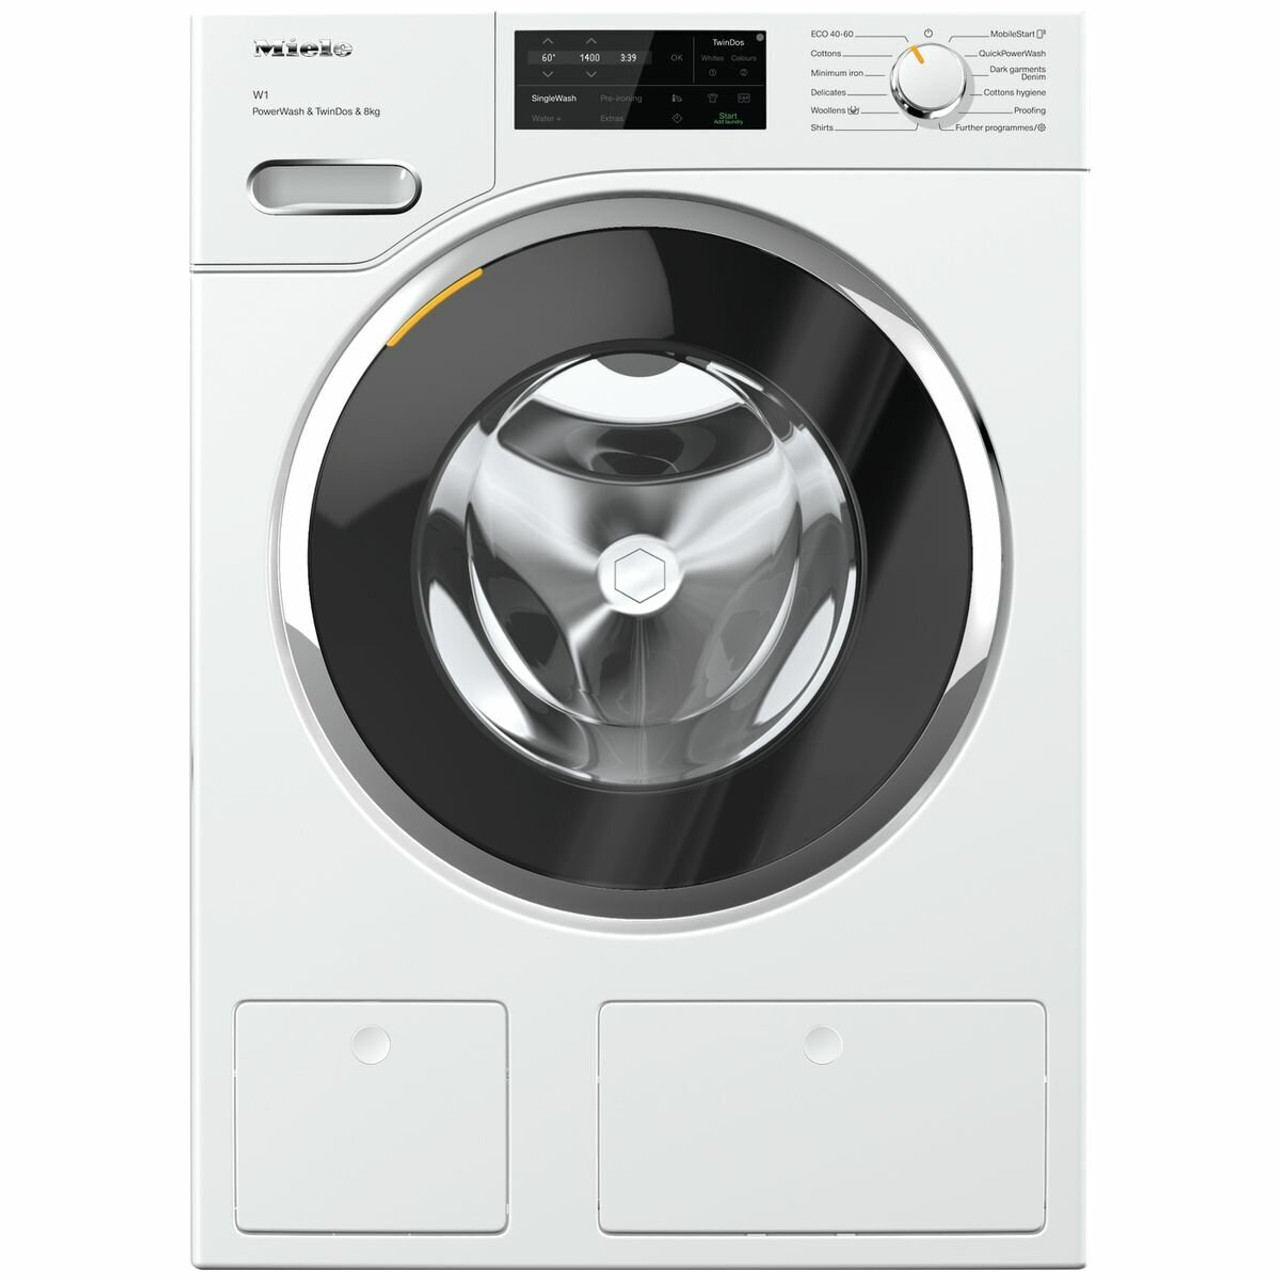 WWH860 - 8kg Front Load Washing Machine - White 